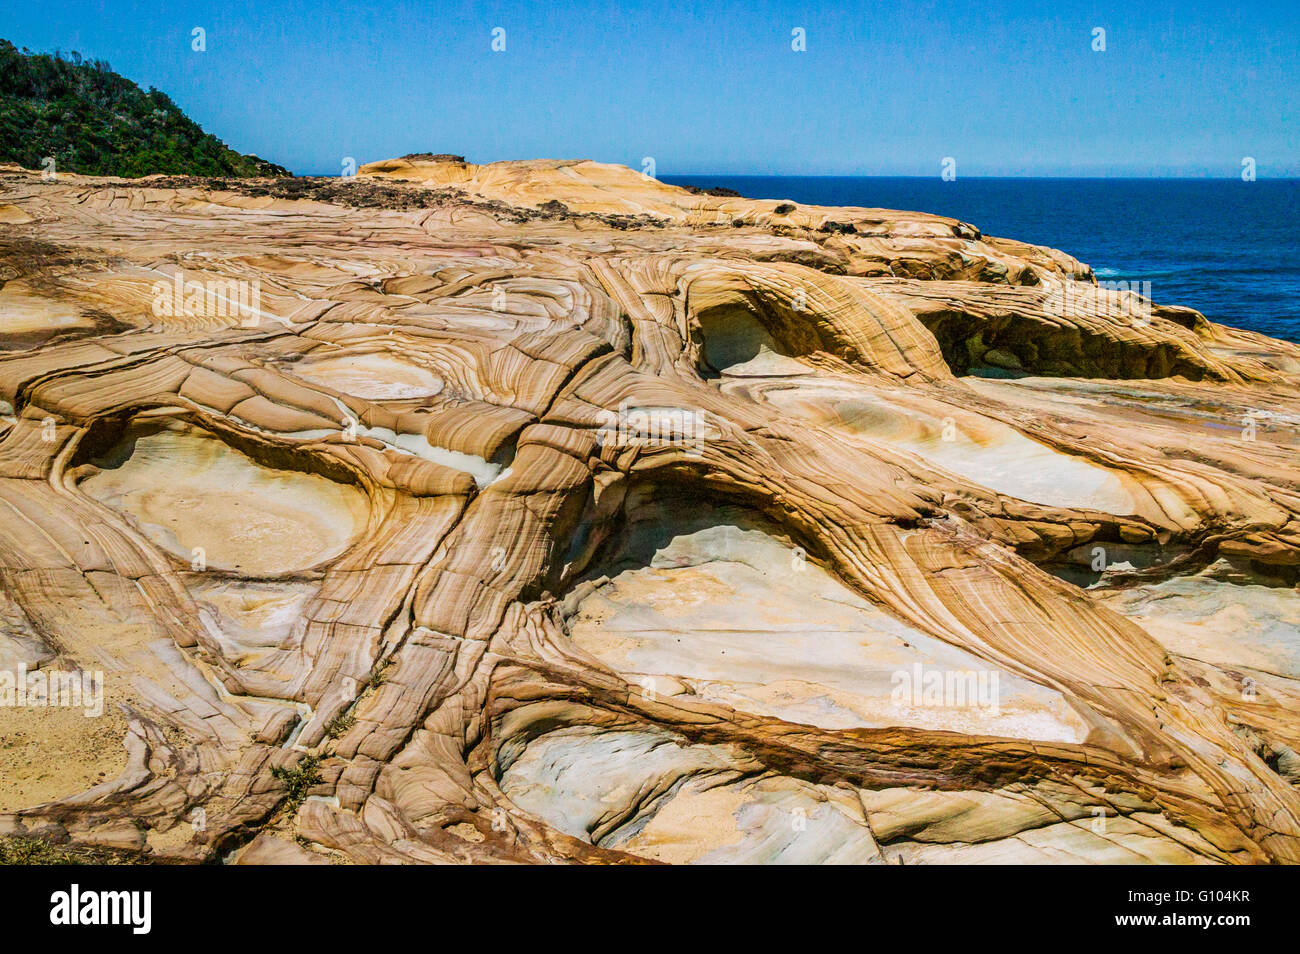 Australia, New South Wales, Central Coast, Bouddi National Park, erosion has formed beautiful patterns in Hawkesbury sandstone Stock Photo